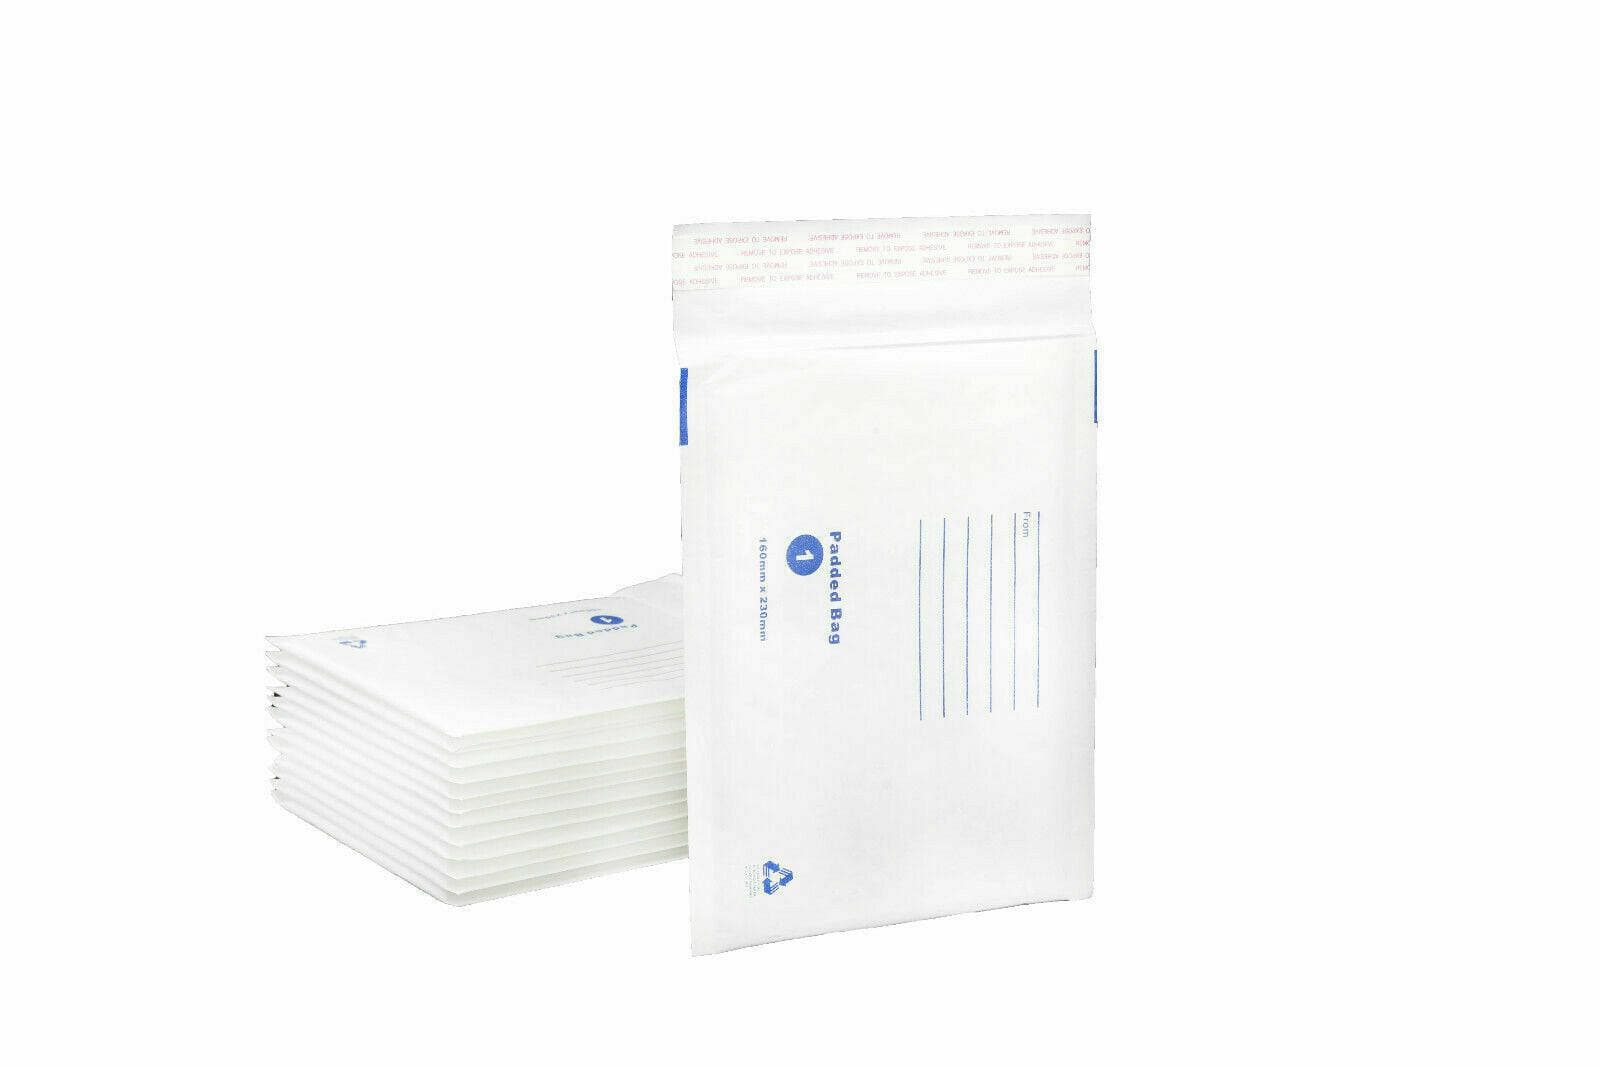 Padded Strong Bubble Envelopes 160 X 230mm - Office Catch